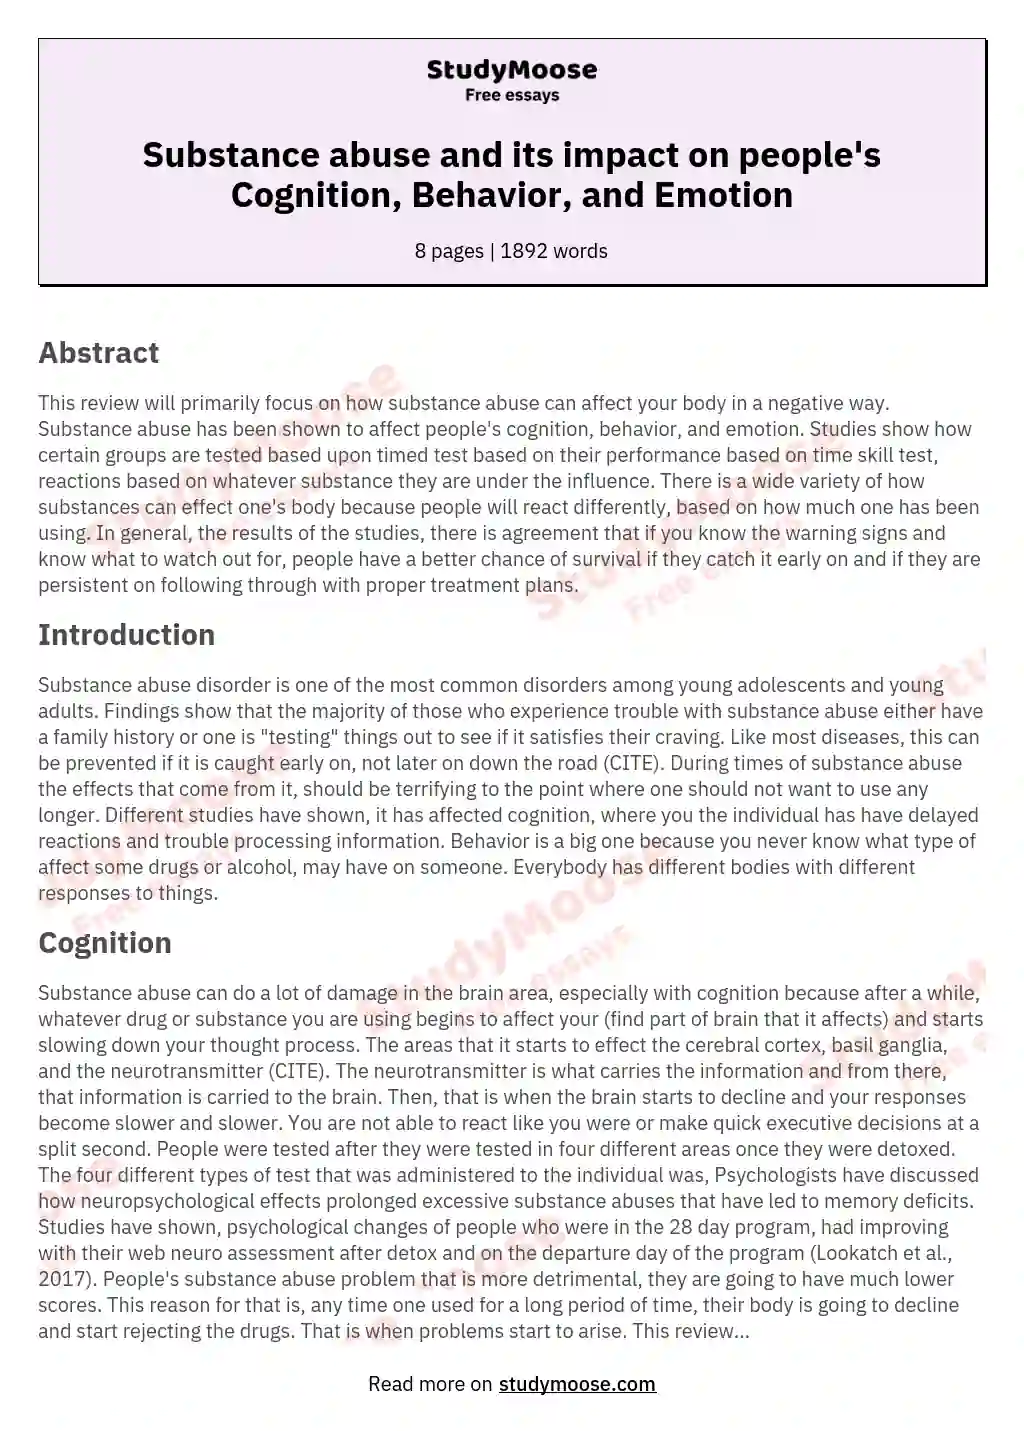 Substance abuse and its impact on people's Cognition, Behavior, and Emotion essay